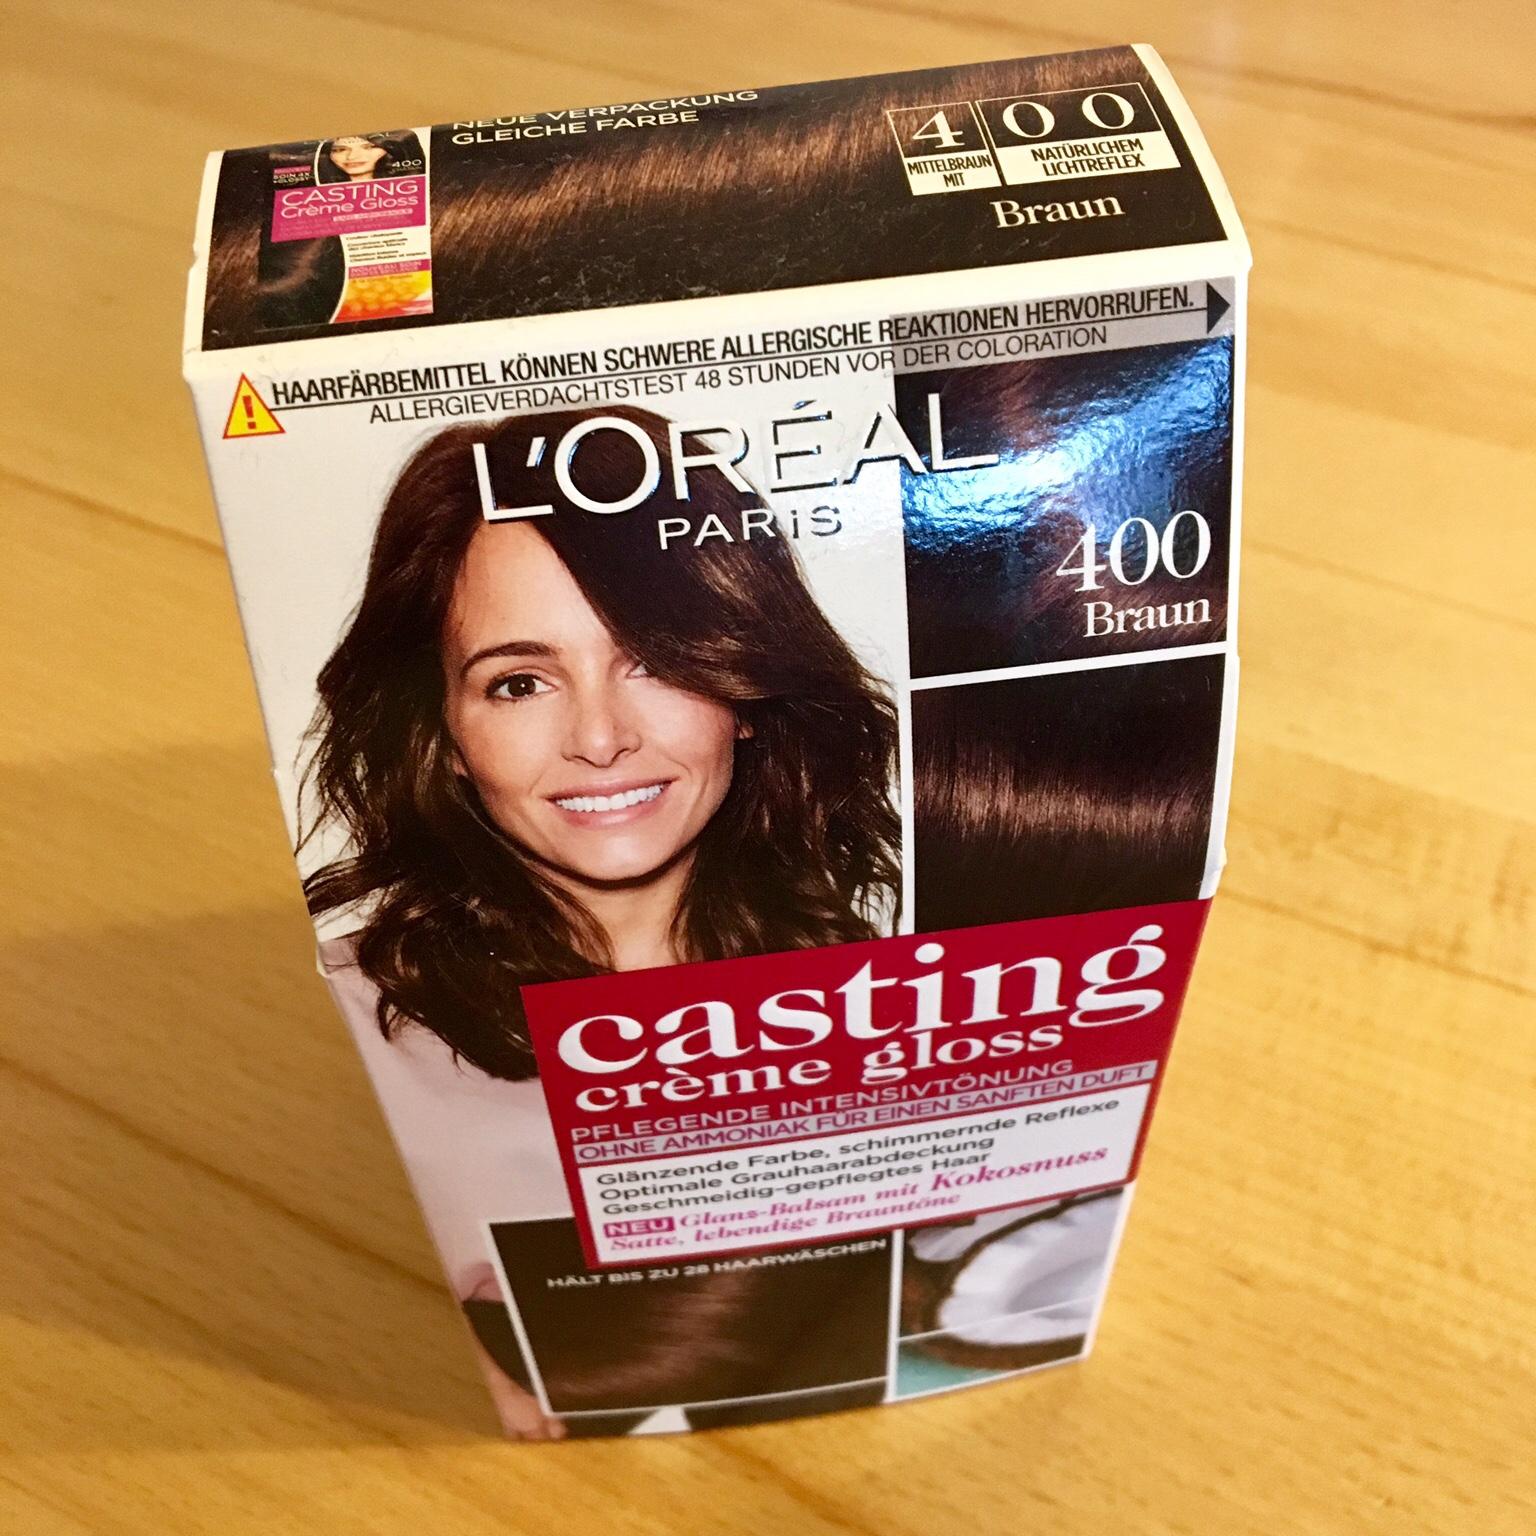 Haarfarbe Tonung Loreal In 6922 Wolfurt For Free For Sale Shpock